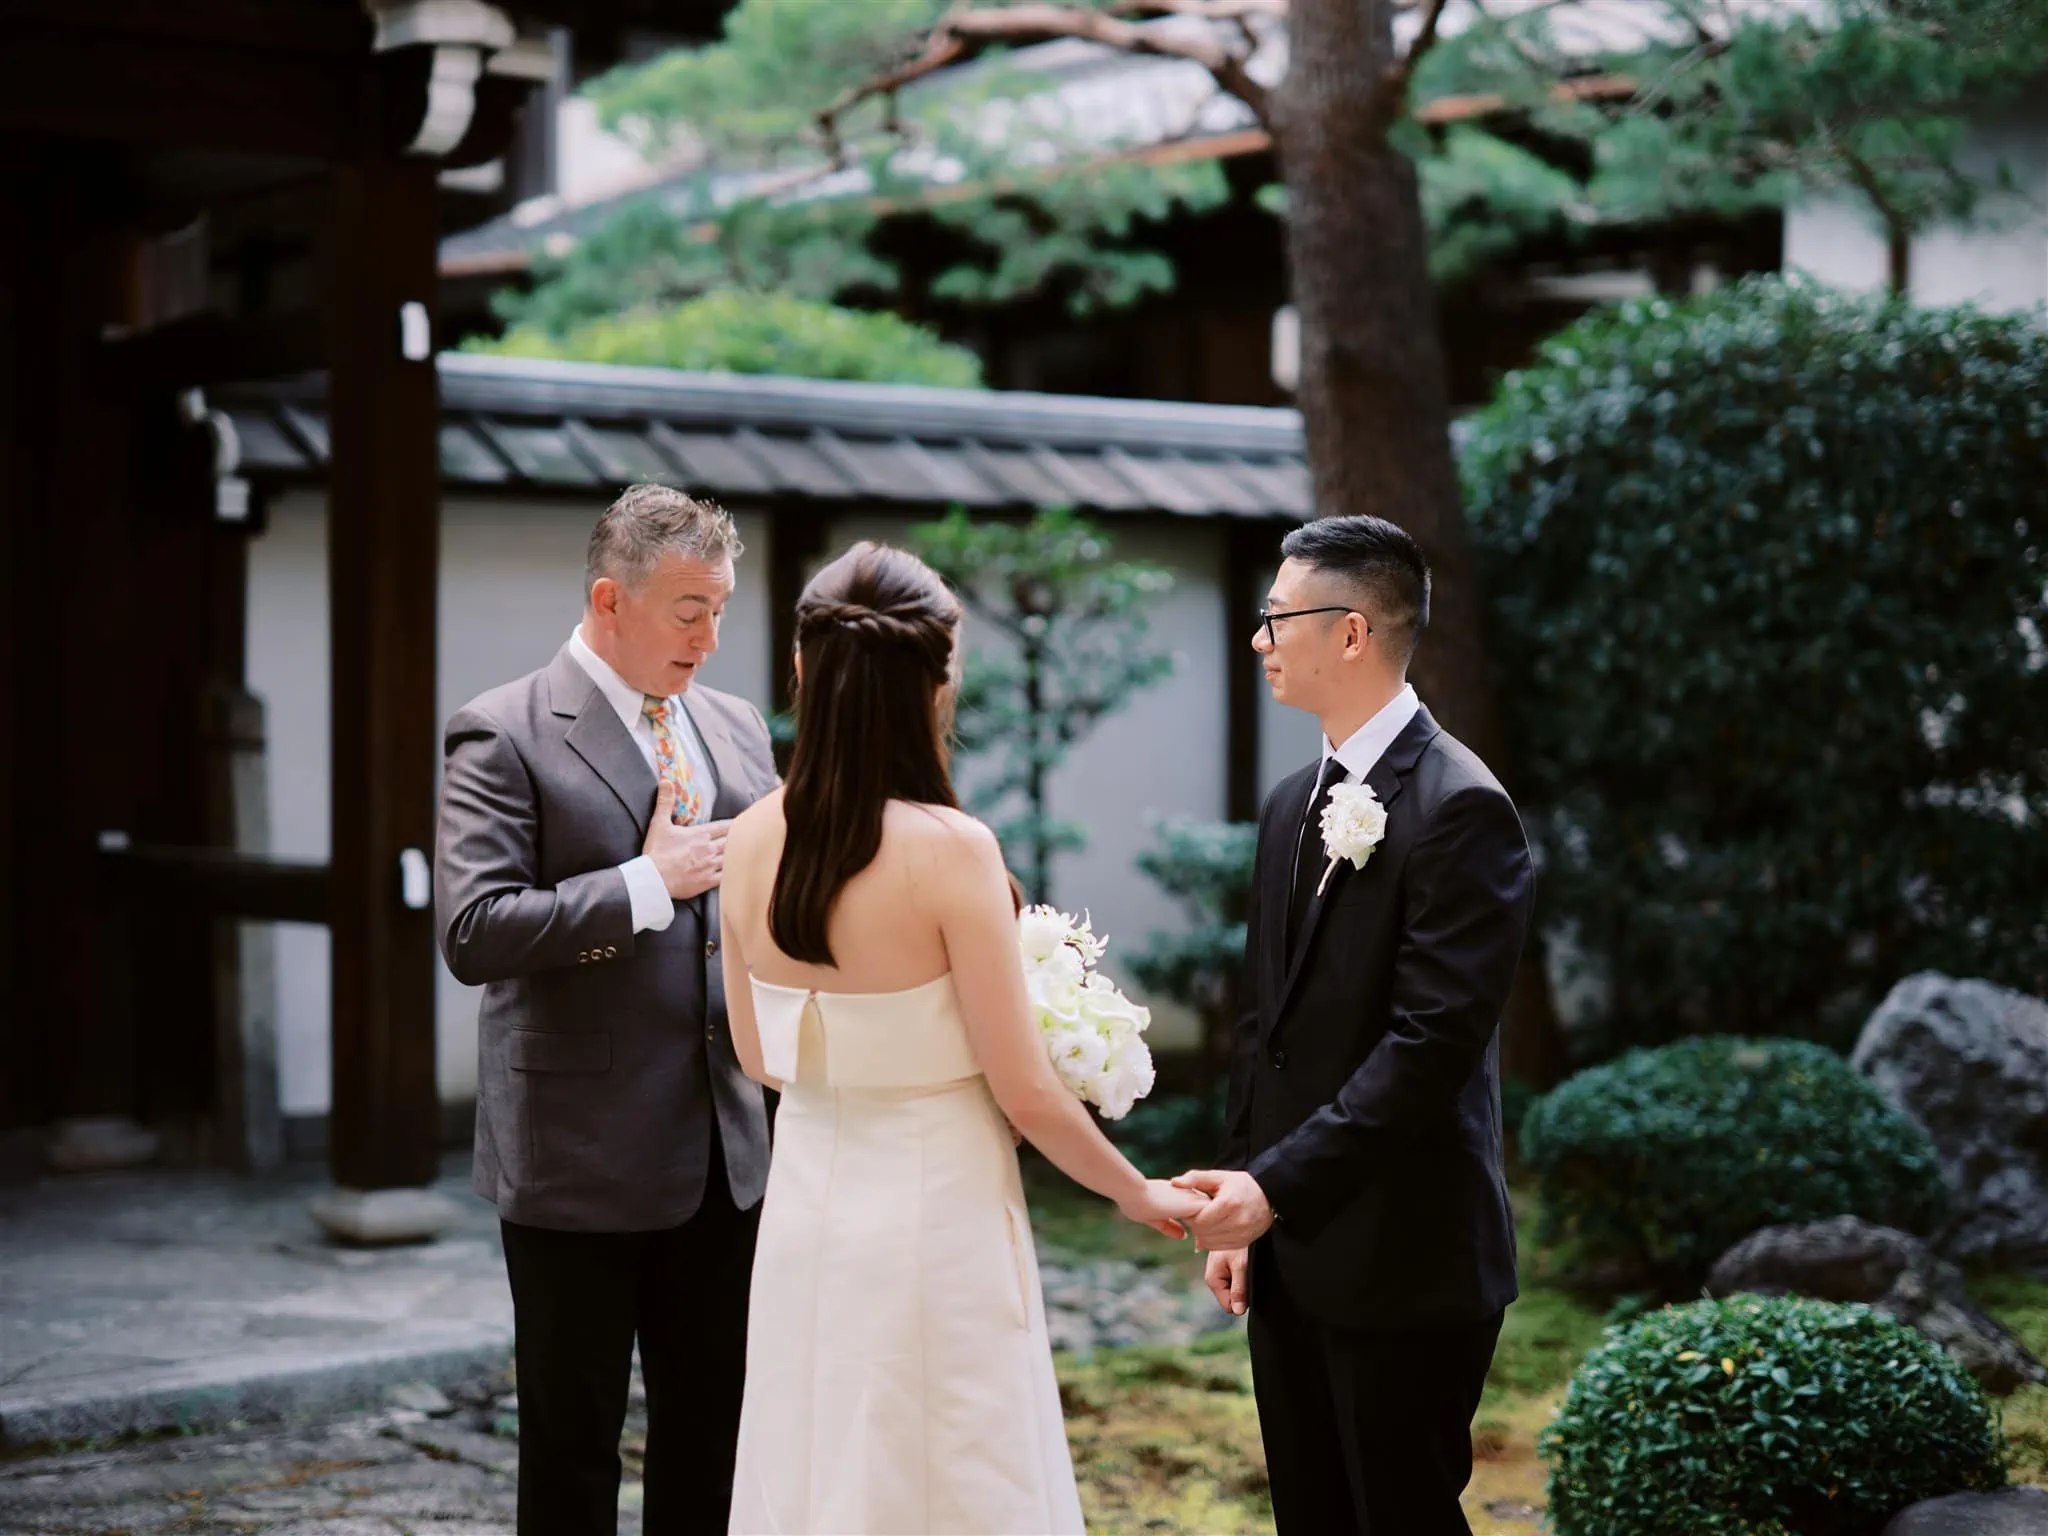 Kyoto Tokyo Japan Elopement Wedding Photographer, Planner & Videographer | A bride and groom exchange vows in a Japanese garden during their Japan elopement.